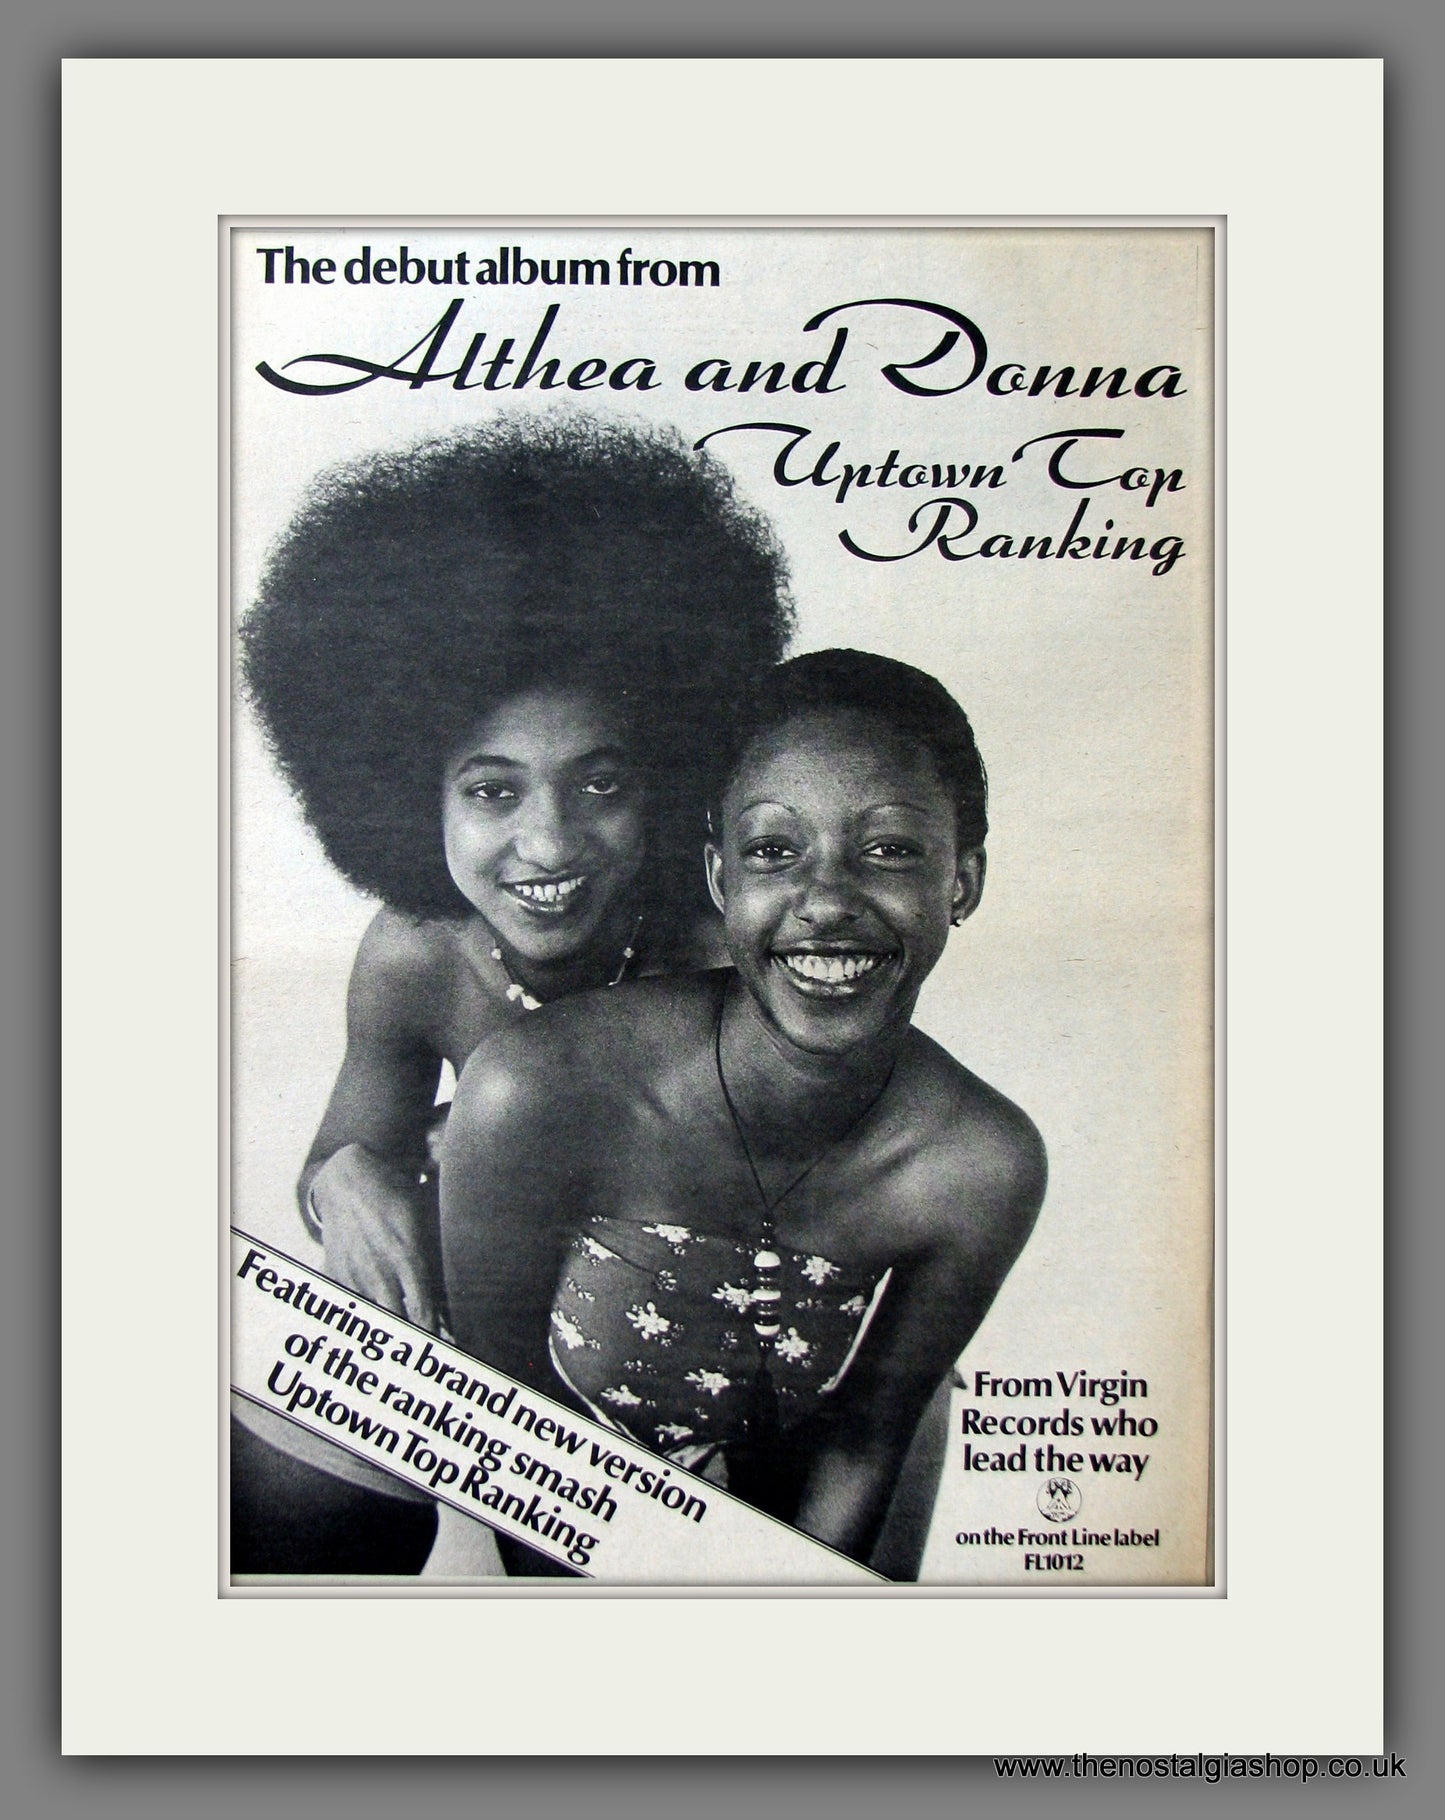 Althea And Donna. Uptown Top Ranking. Original Advert 1978 (ref AD11576)